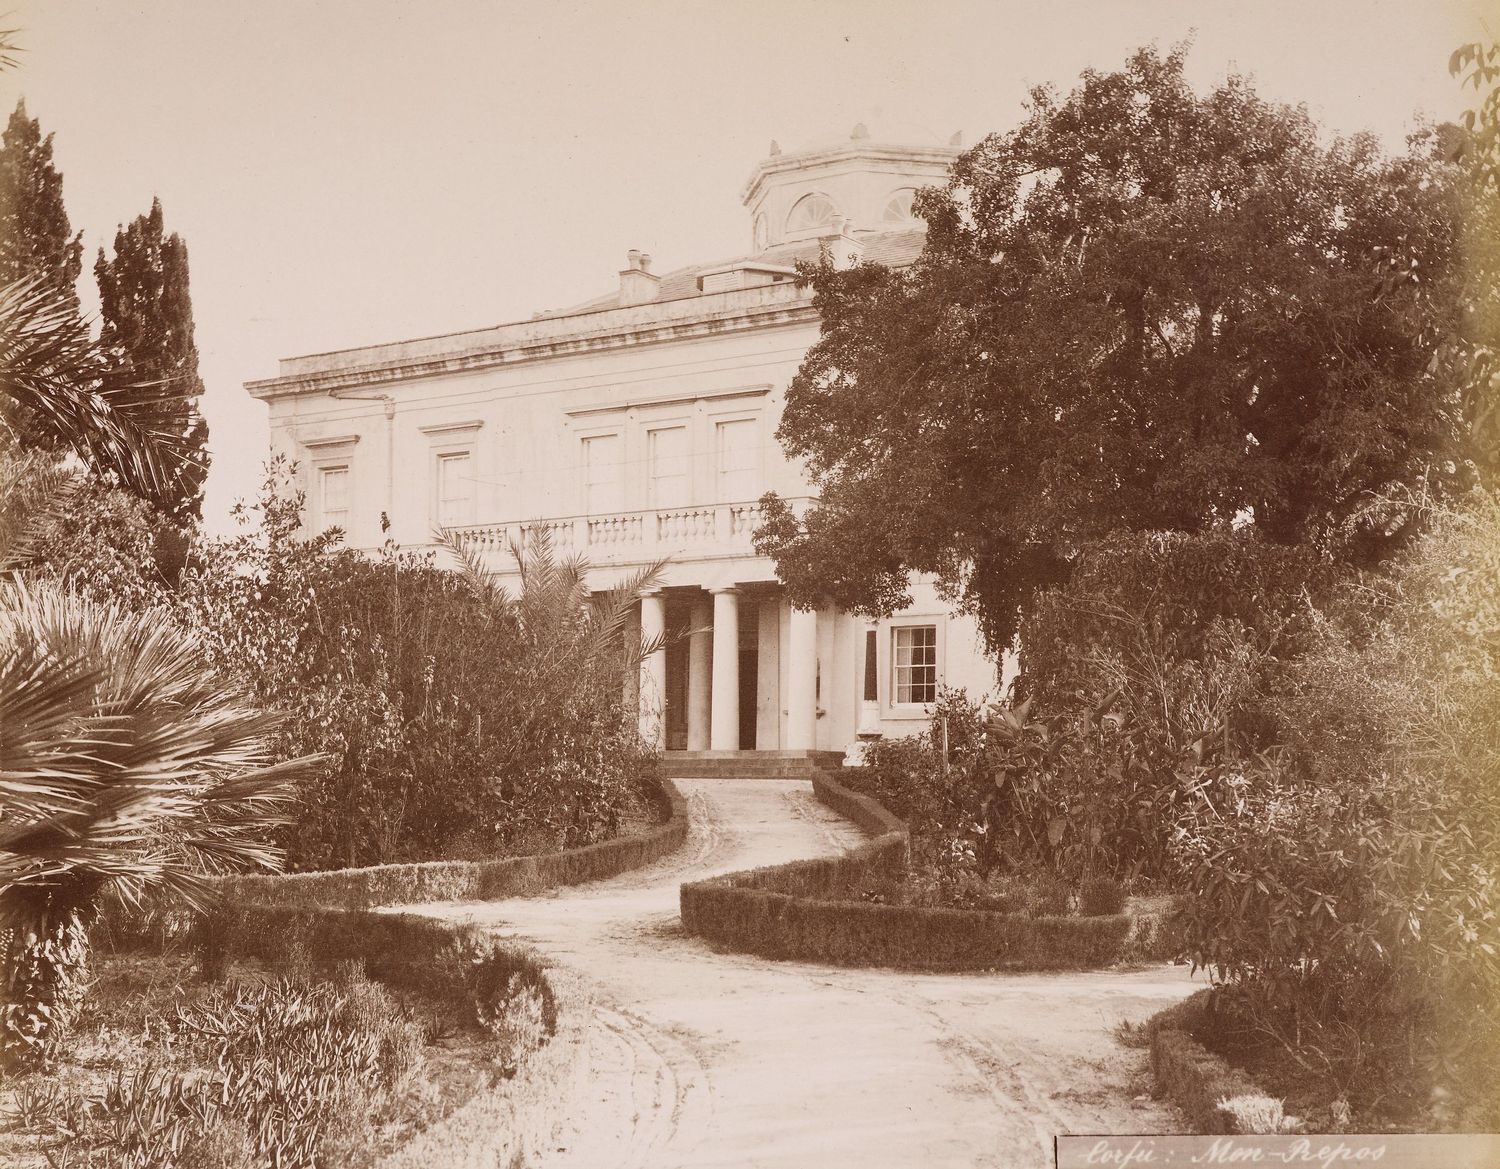 Photograph of Mon Repos villa on Corfu with a view up chicane in driveway, between low hedges separating it from beds of shrubs and trees. A neo-classical house stands at the end with a colonnaded porch.